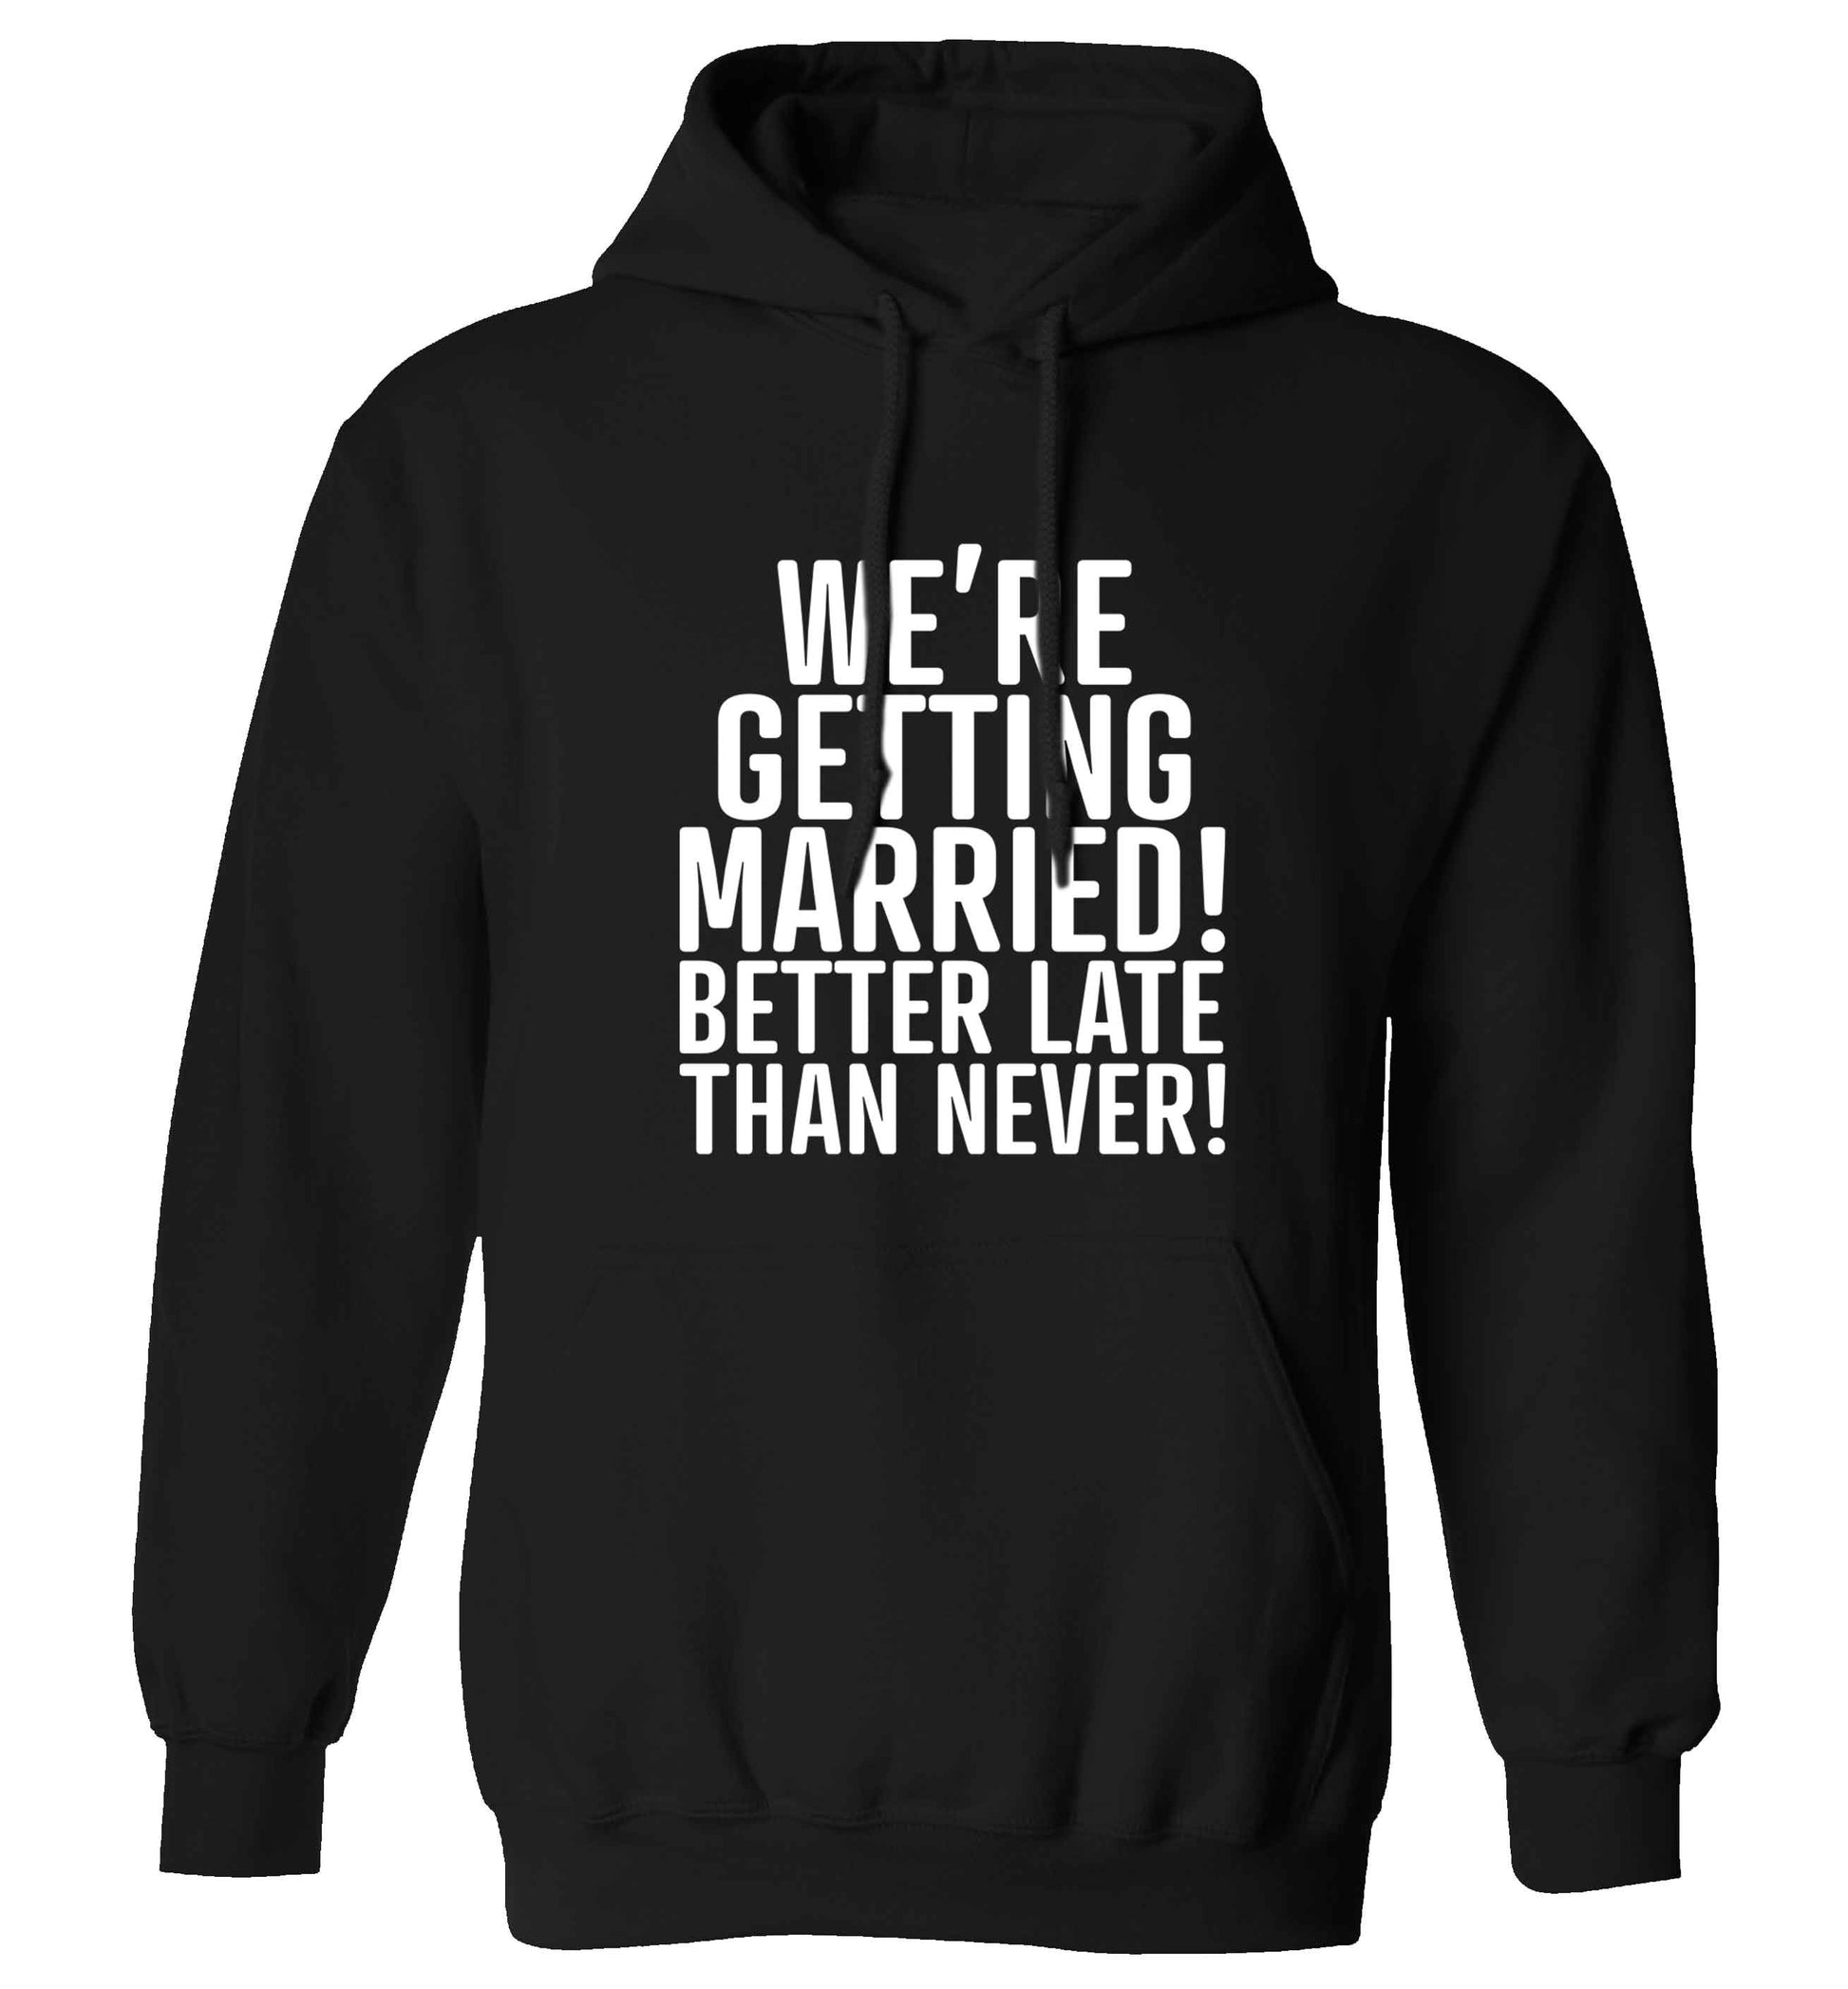 Always the bridesmaid but never the bride? Until now! adults unisex black hoodie 2XL